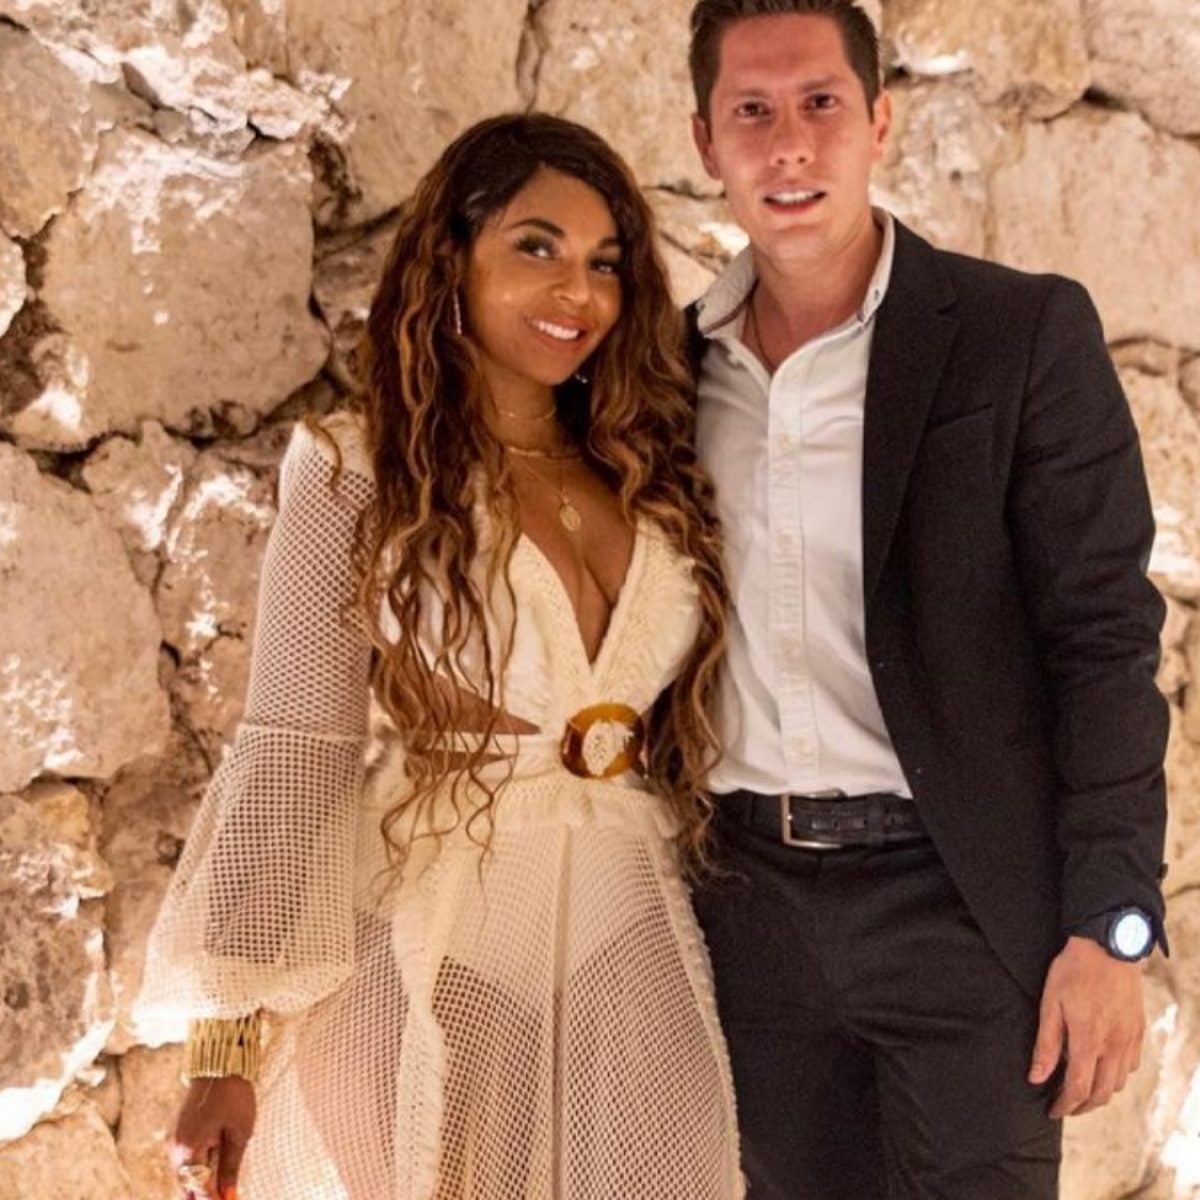 Ashanti's Love Life Is Trending After Sharing Photo With Mystery Gentleman